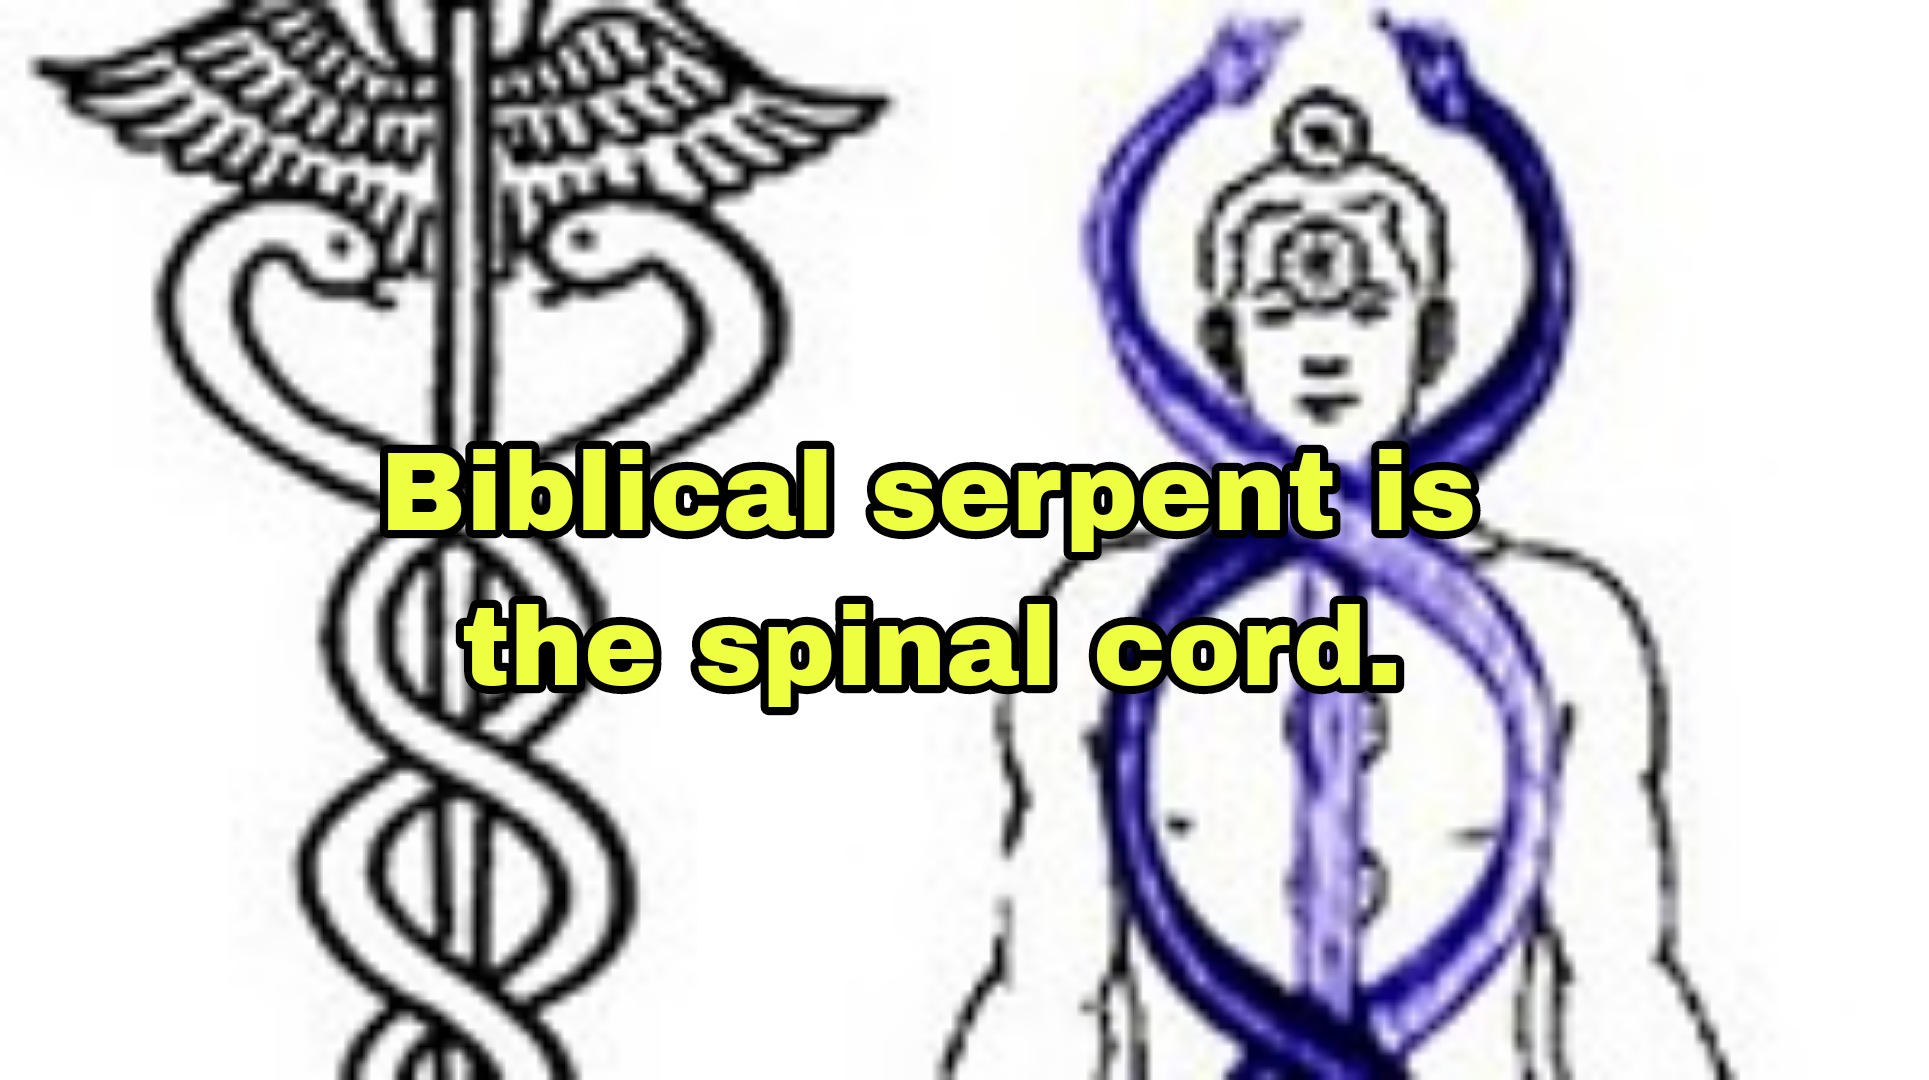 What does the serpent represent in the Bible?